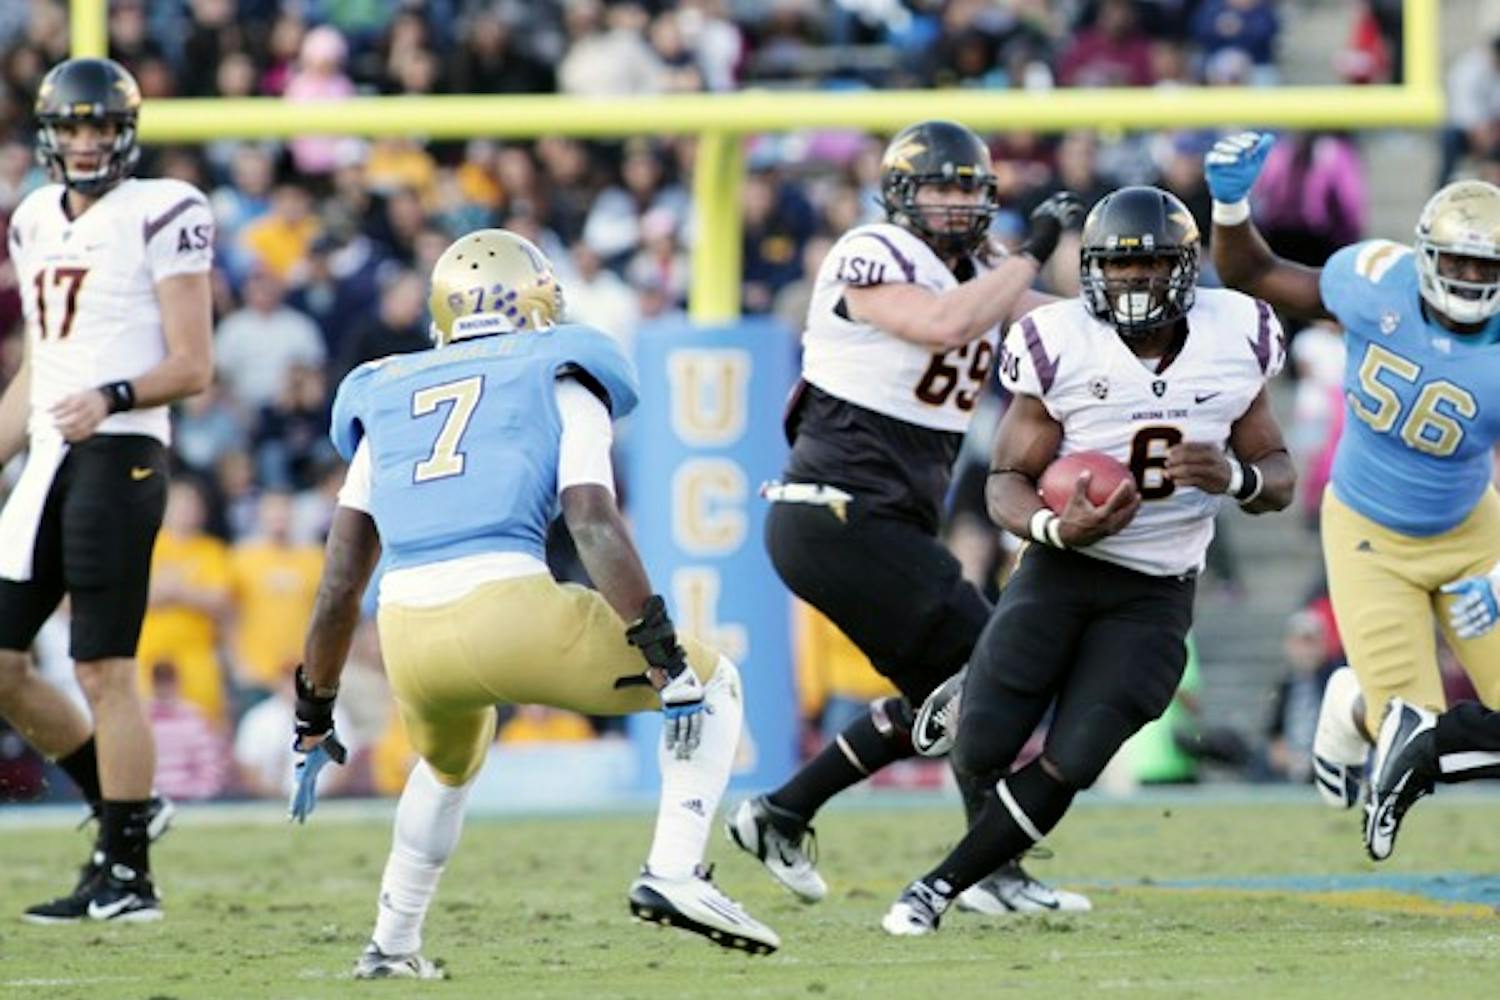 ROADBLOCK: ASU junior running back Cameron Marshall (6) tries to run around UCLA free safety Tevin McDonald (7) during the Bruins’ 29-28 upset over the Sun Devils on Saturday. The win over ASU gave UCLA the Pac-12 South lead with three games remaining for both teams’ respective seasons. (Photo by Beth Easterbrook)